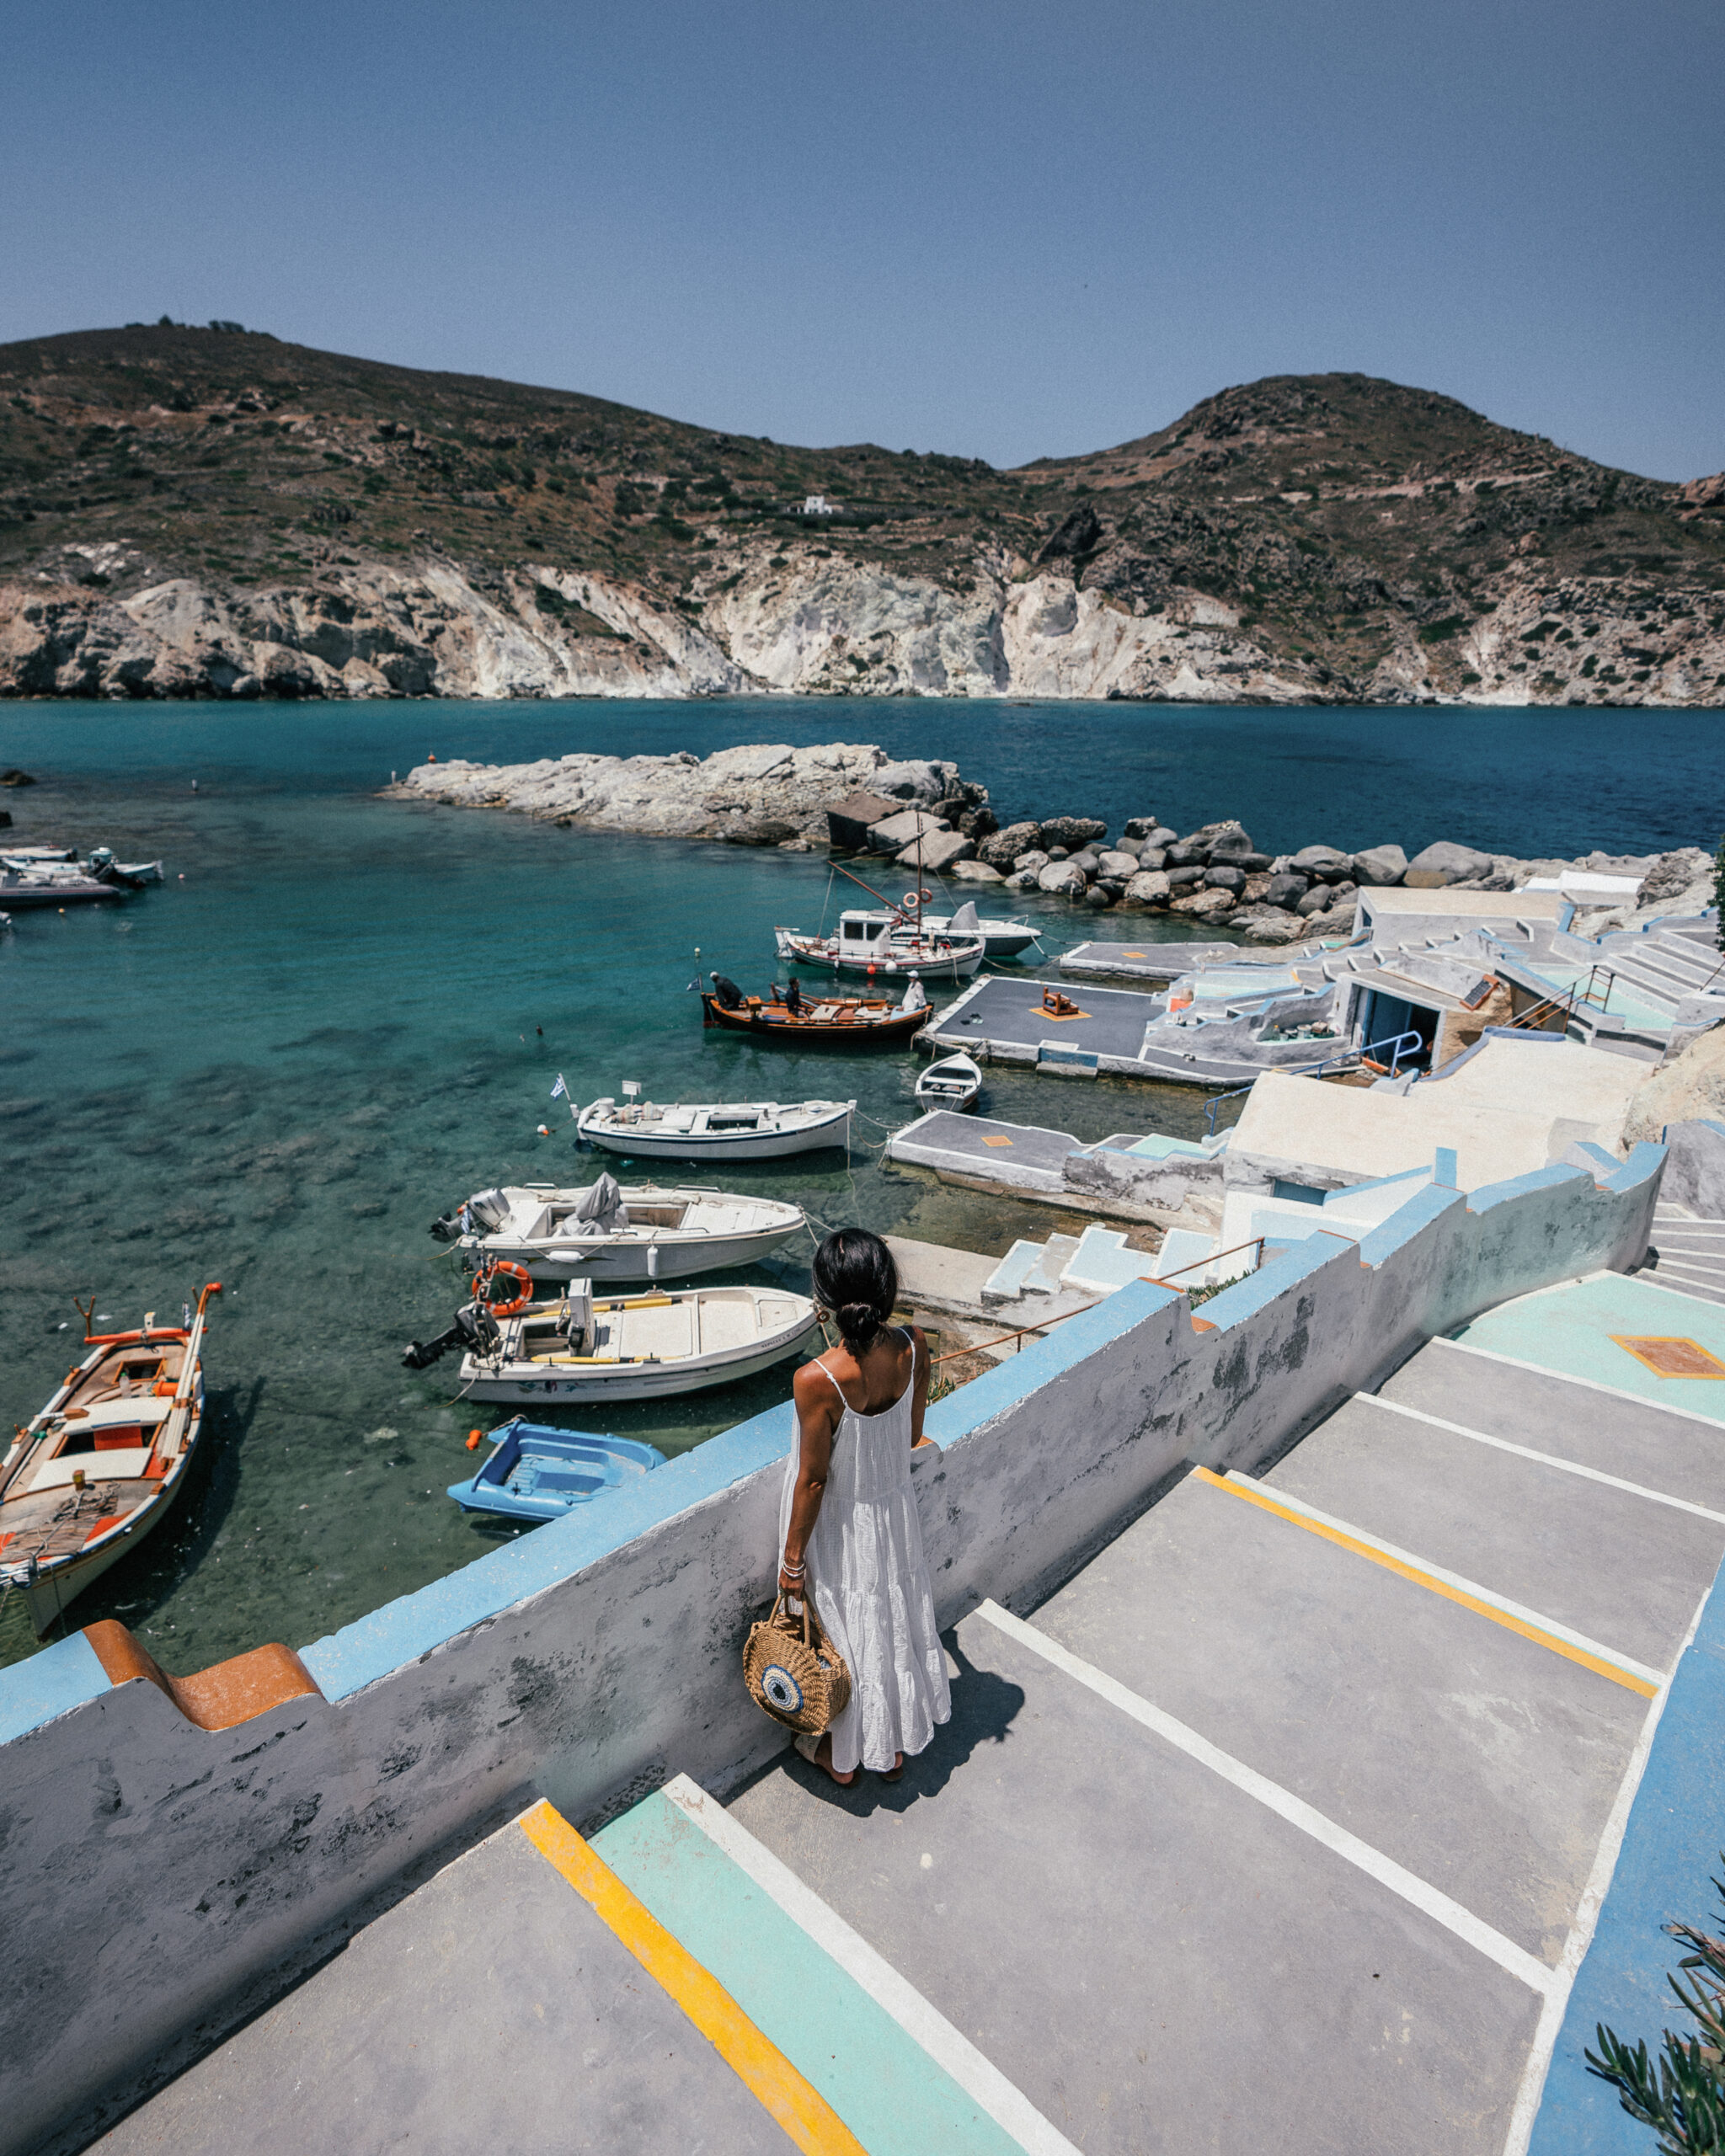 The ultimate travel guide to the Greek island of Milos including the best beaches, villages, restaurants, day trips, hotels and more.